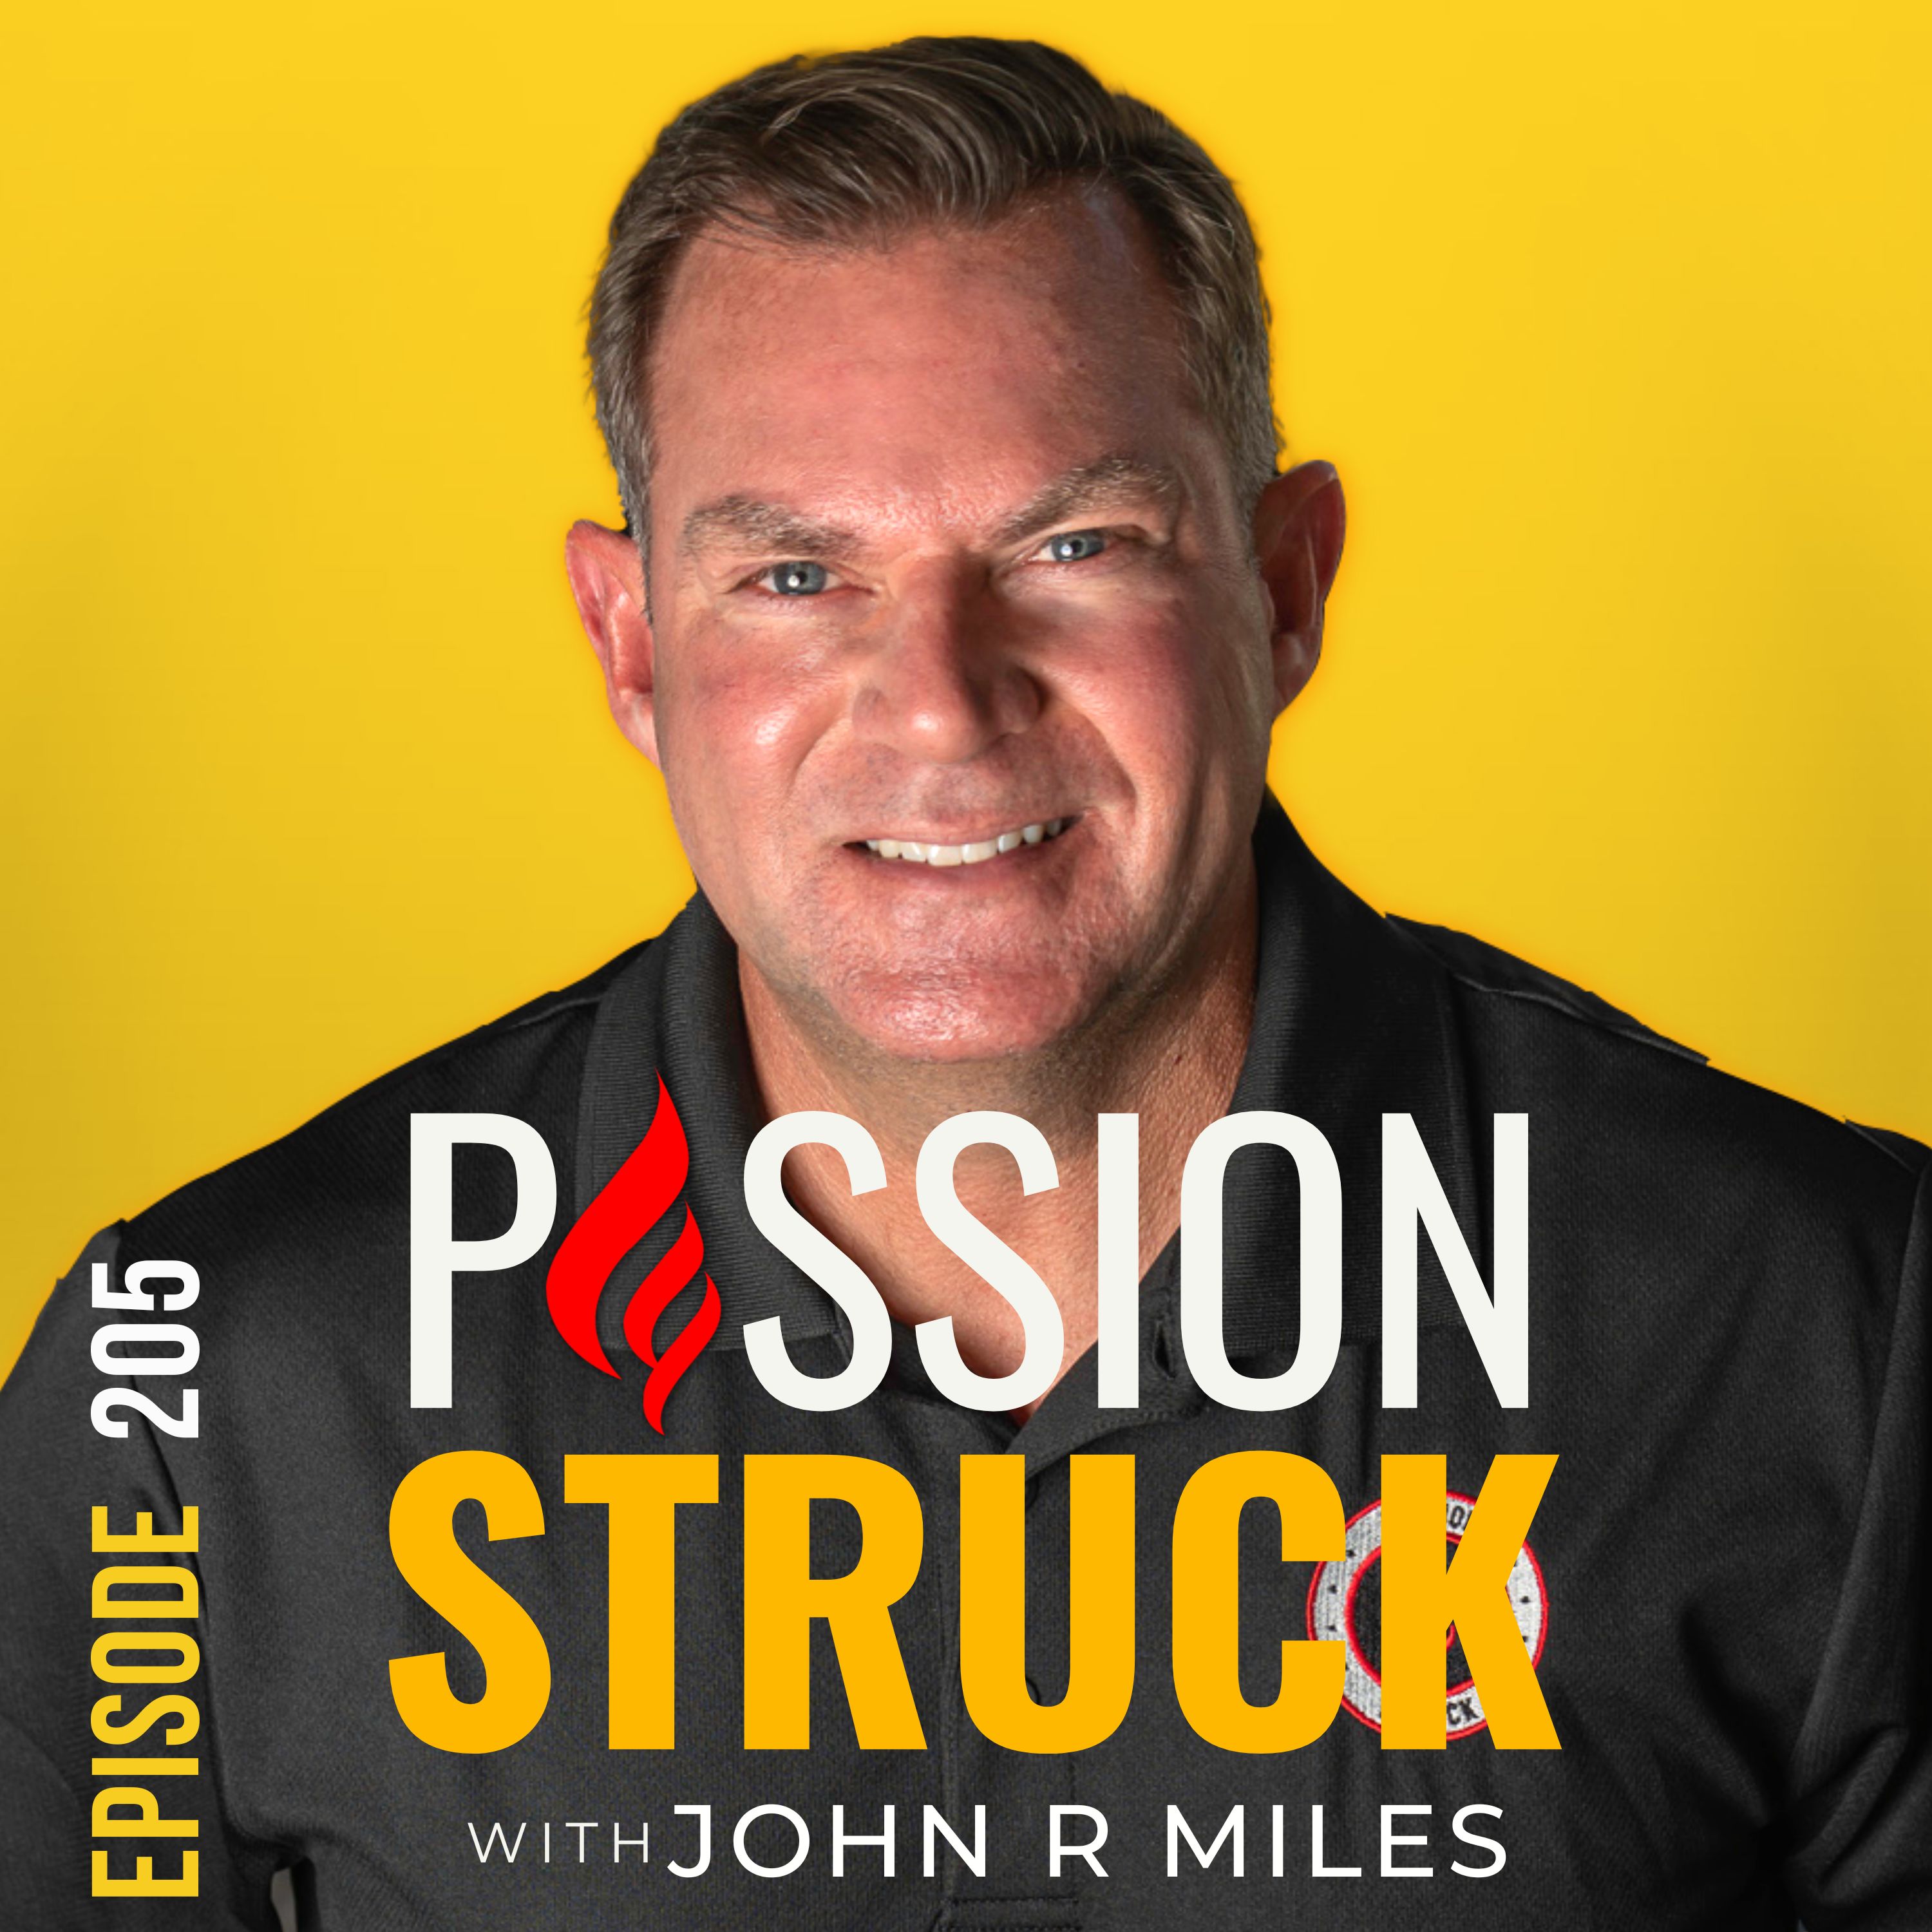 Passion Struck with John R. Miles album cover episode 205 on how to break free from digital addiction